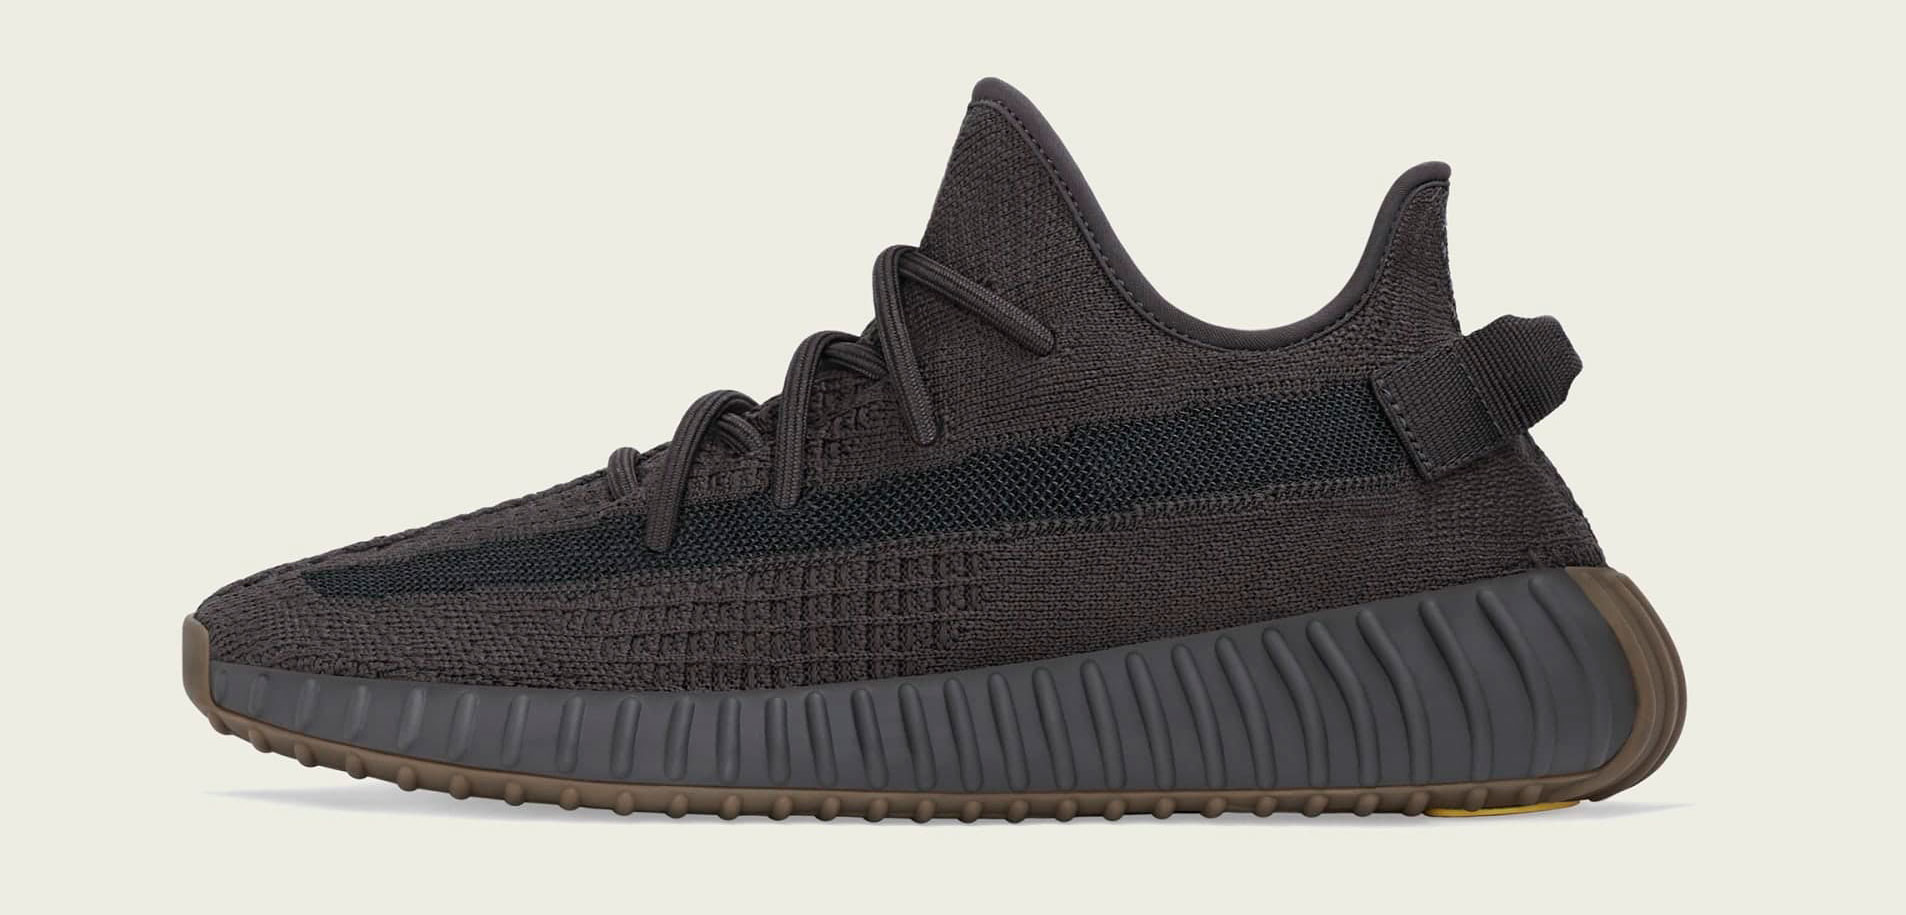 yeezy-boost-350-v2-cinder-release-date-price-1